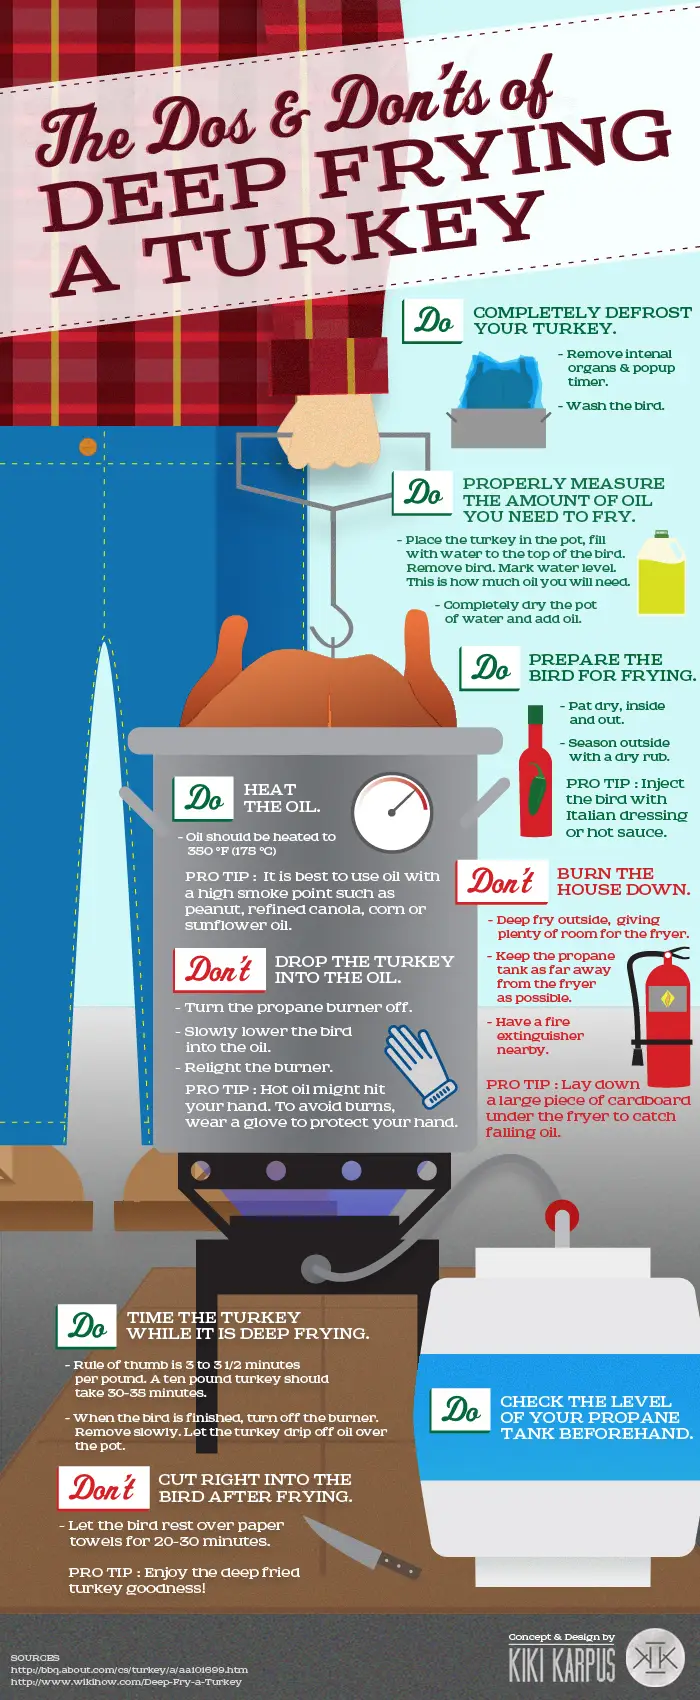 Do’s And Don’ts Of Deep Frying Turkey
